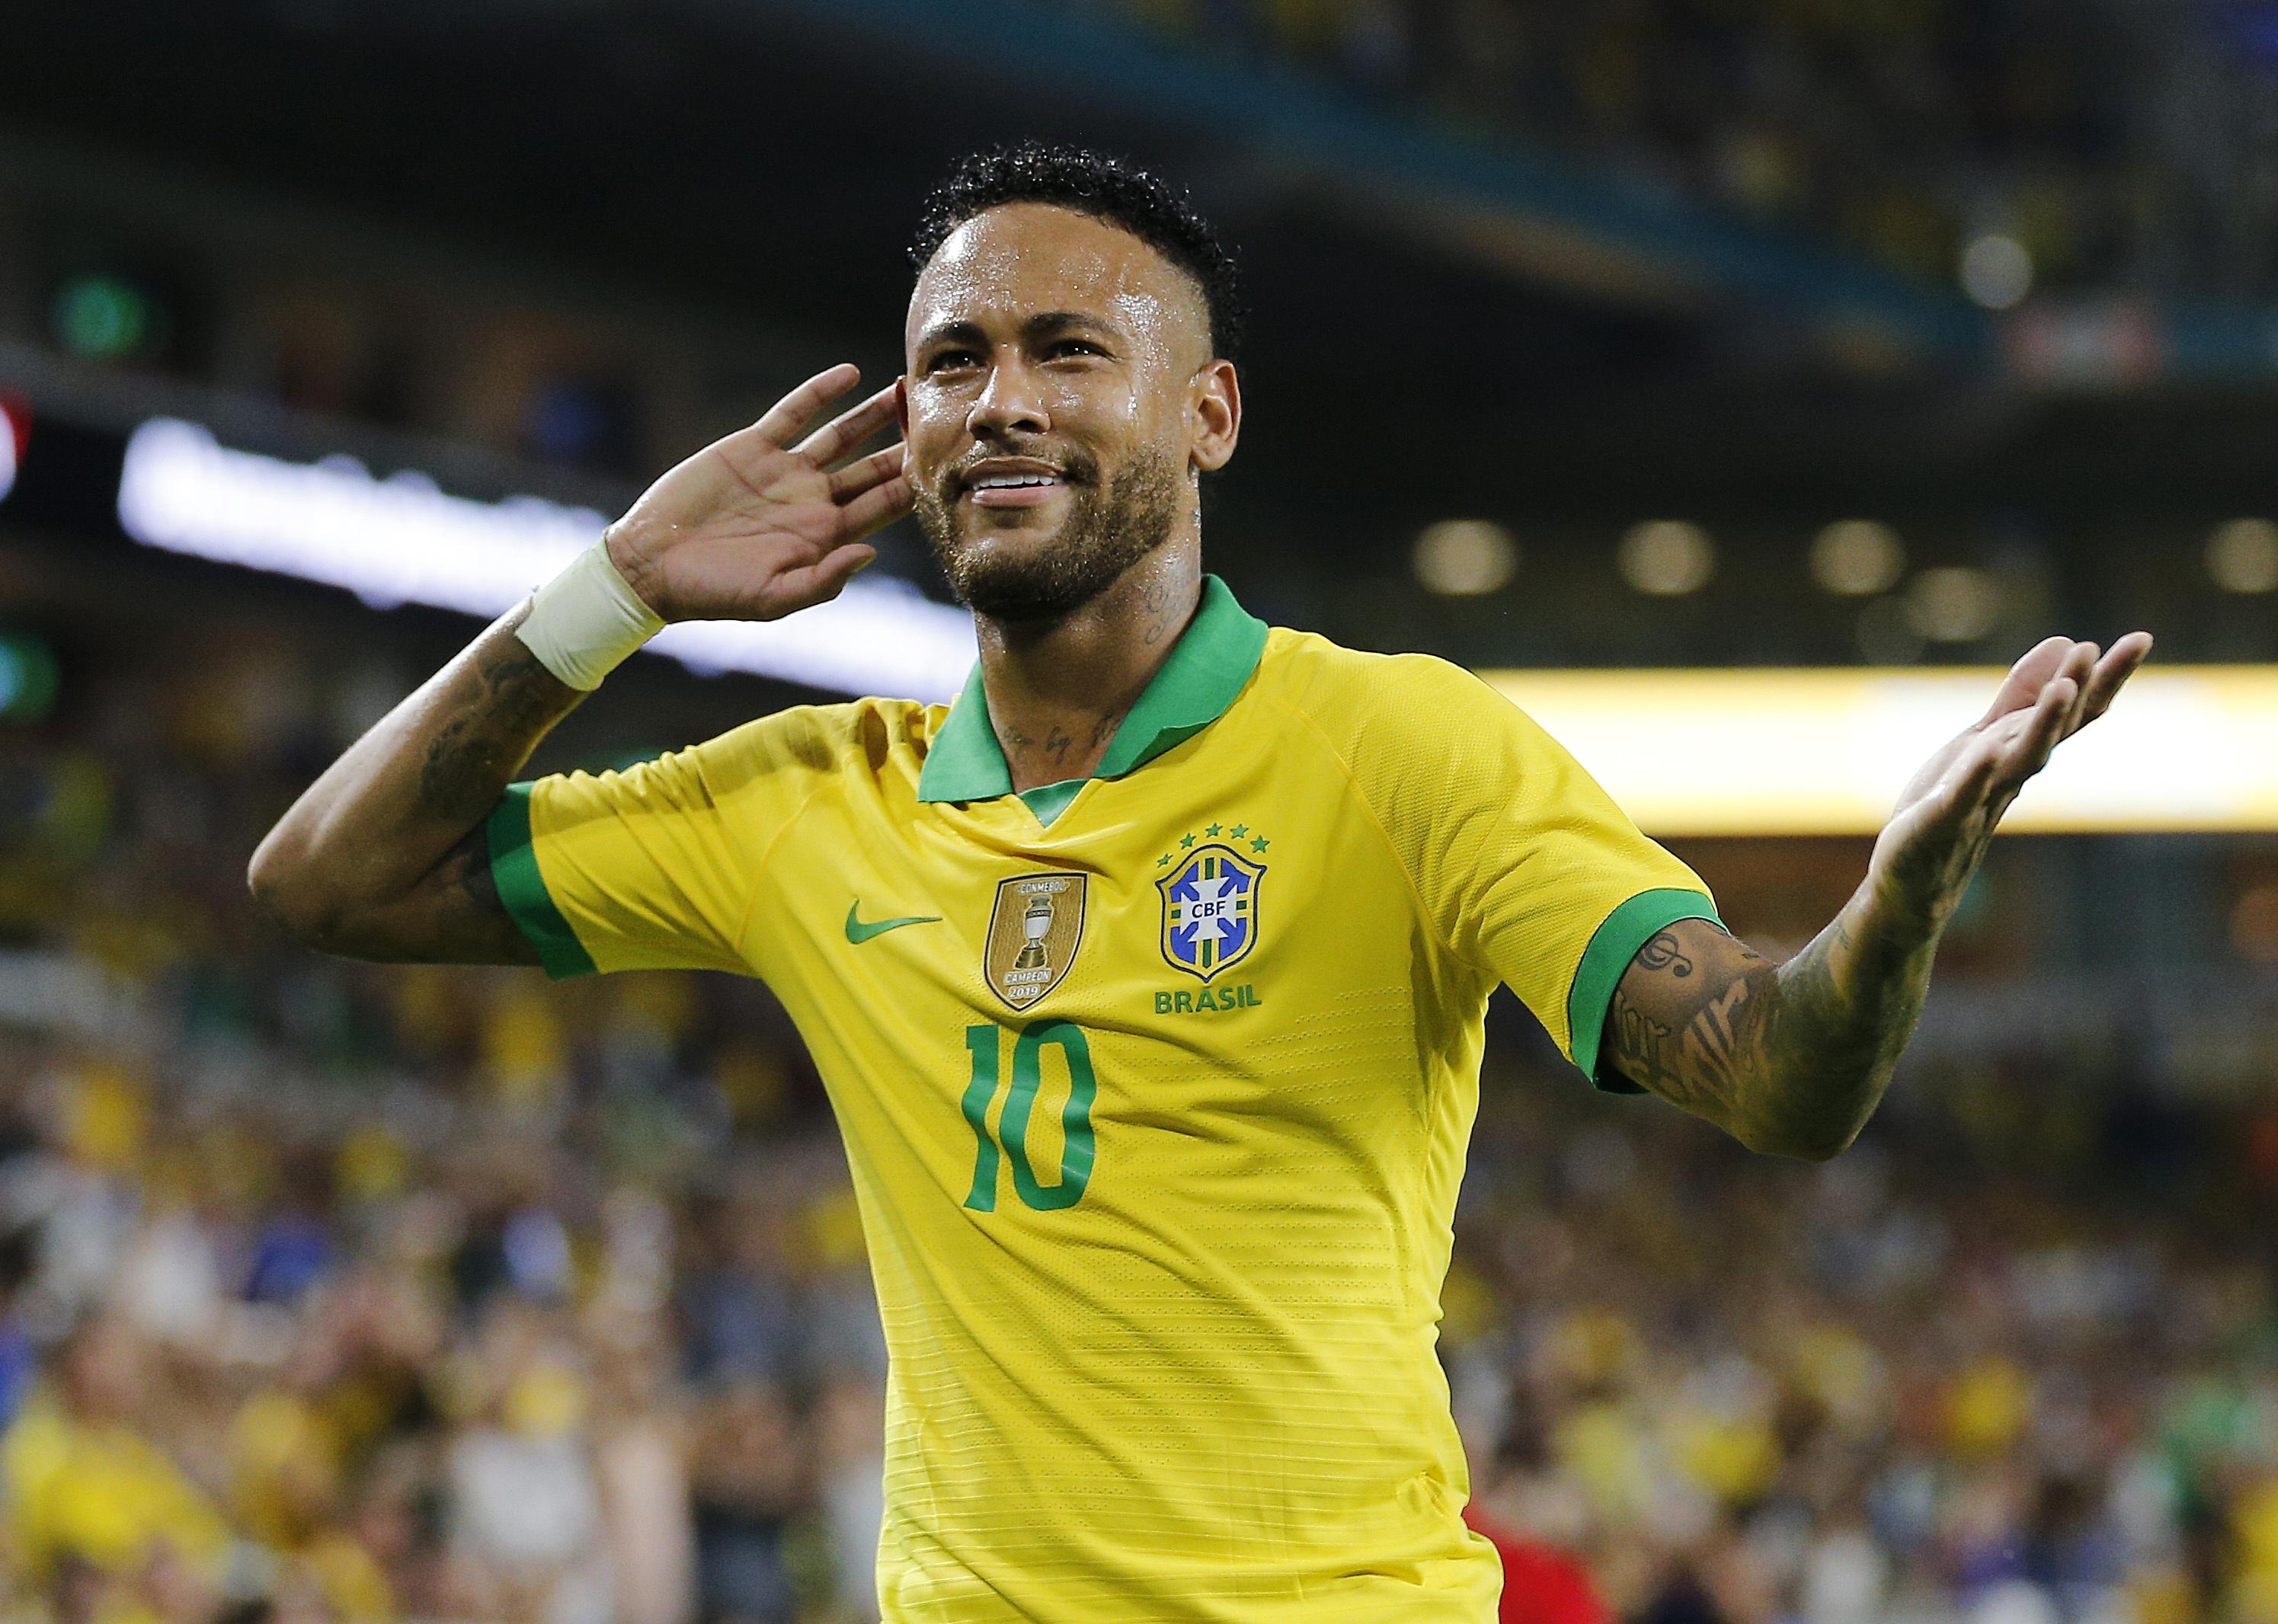 Neymar Jr. of Brazil reacts after assisting on a goal